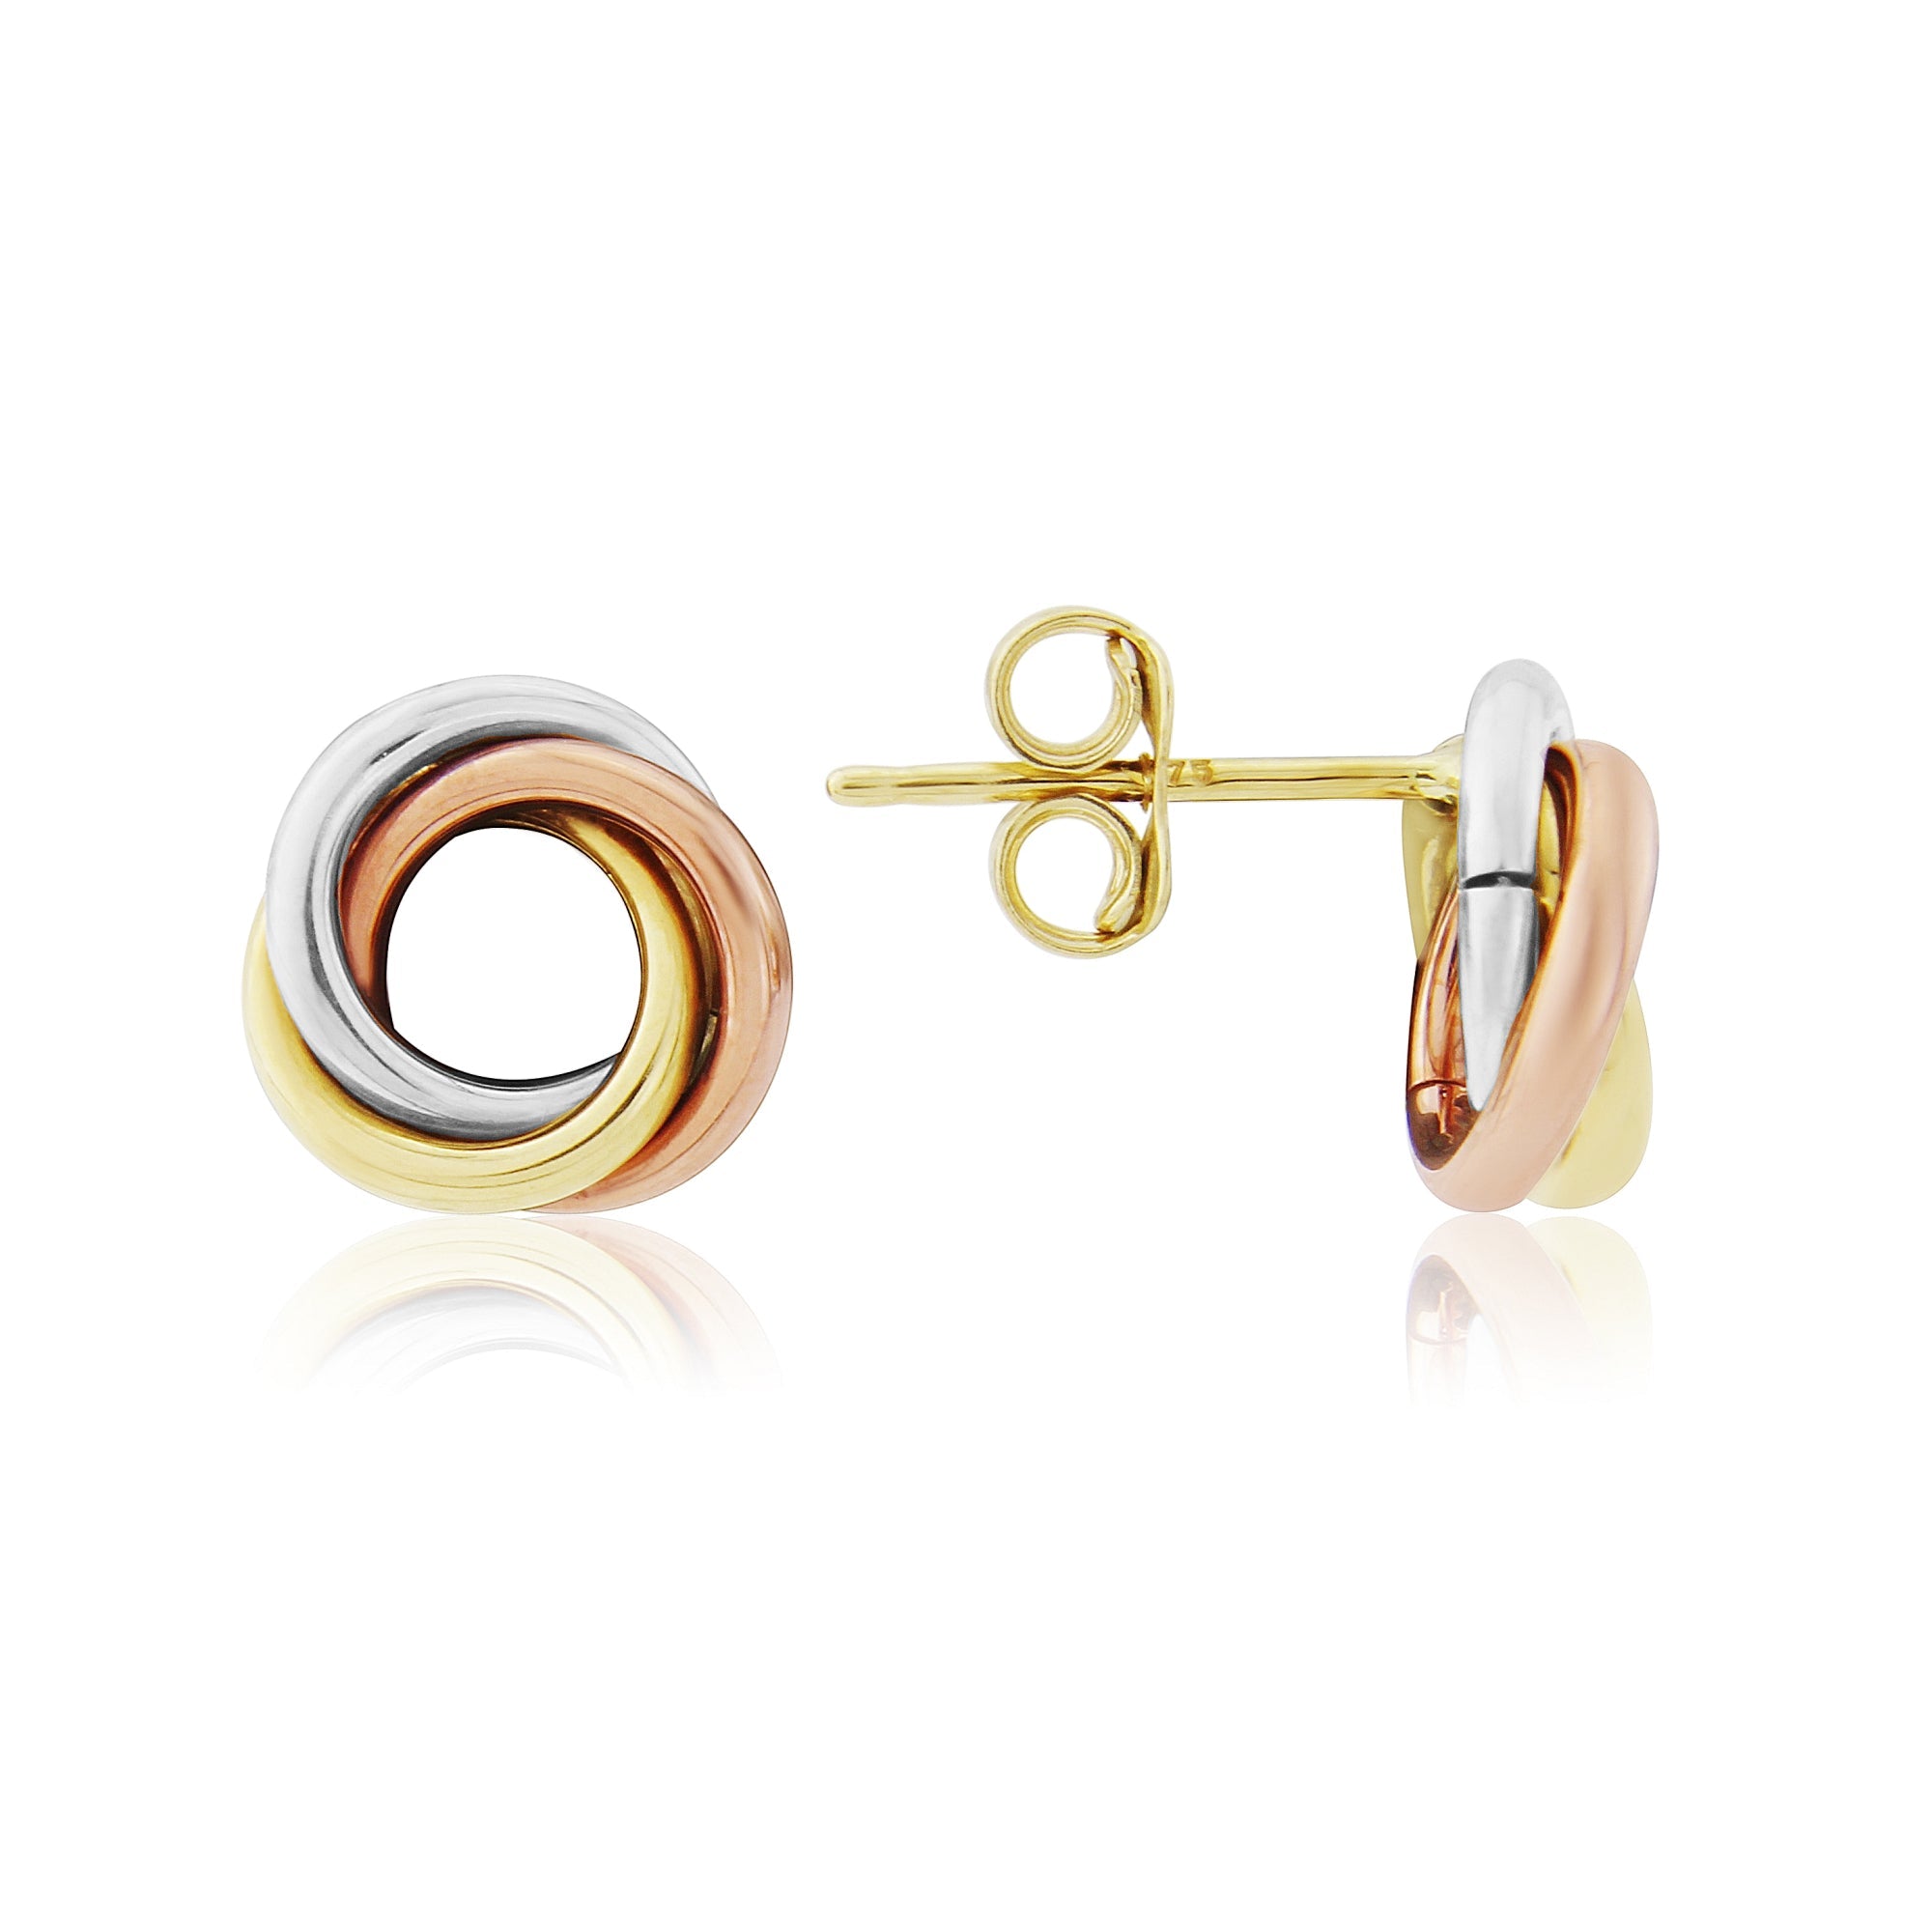 9ct gold 3 colour stud earrings